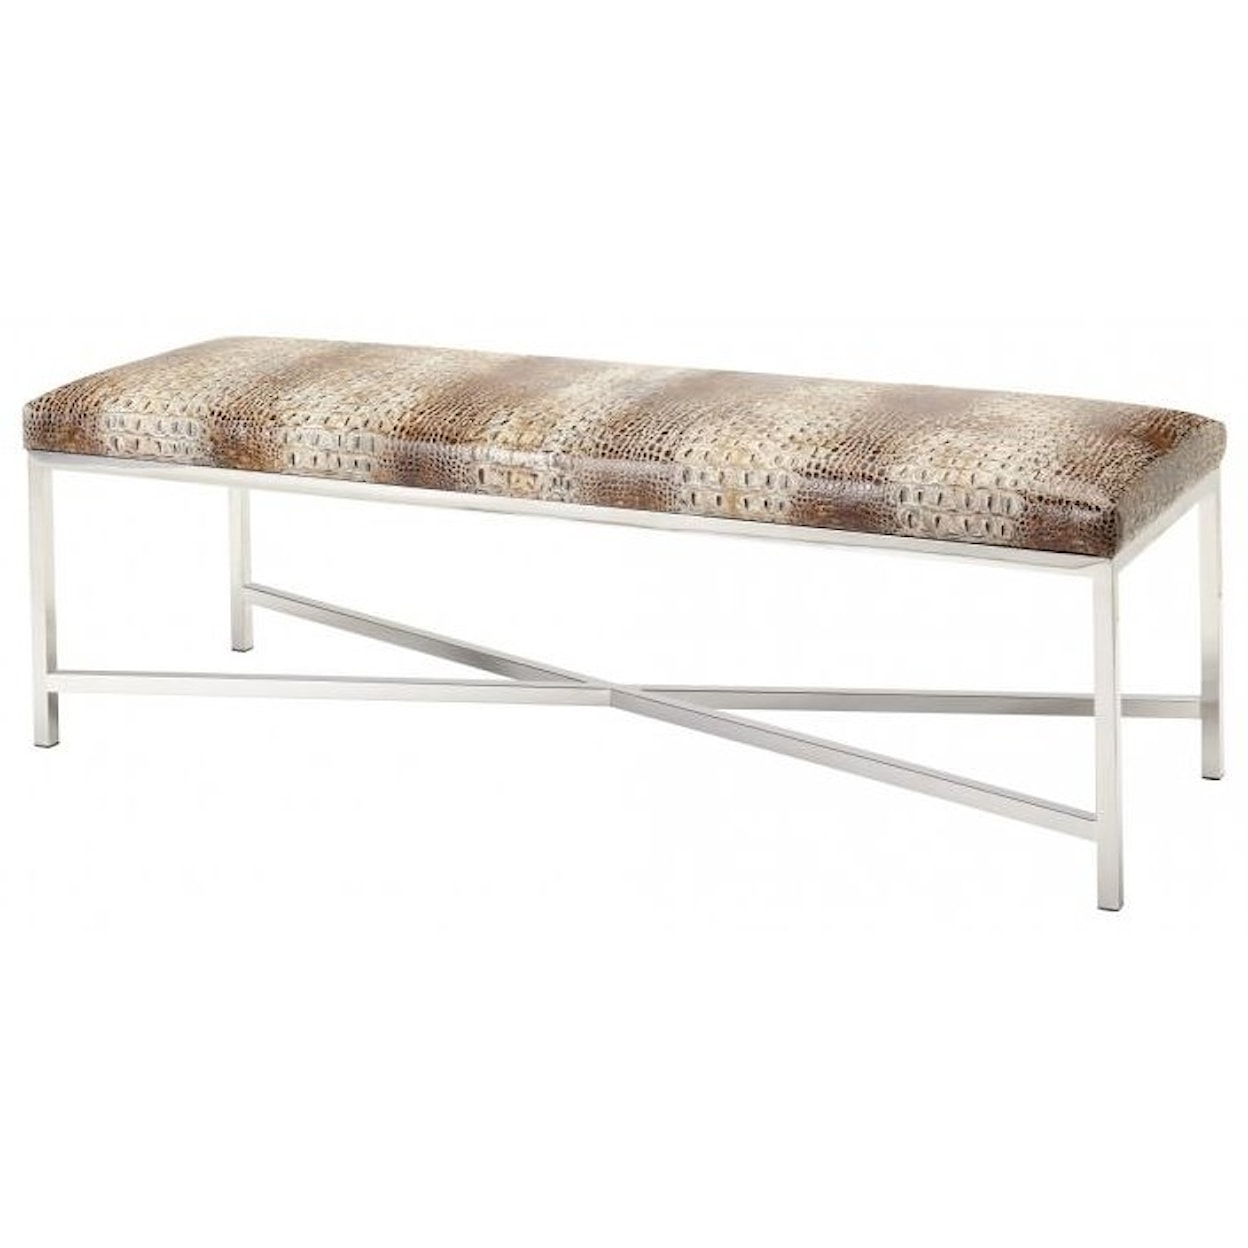 Massoud Pax Upholstered Benches